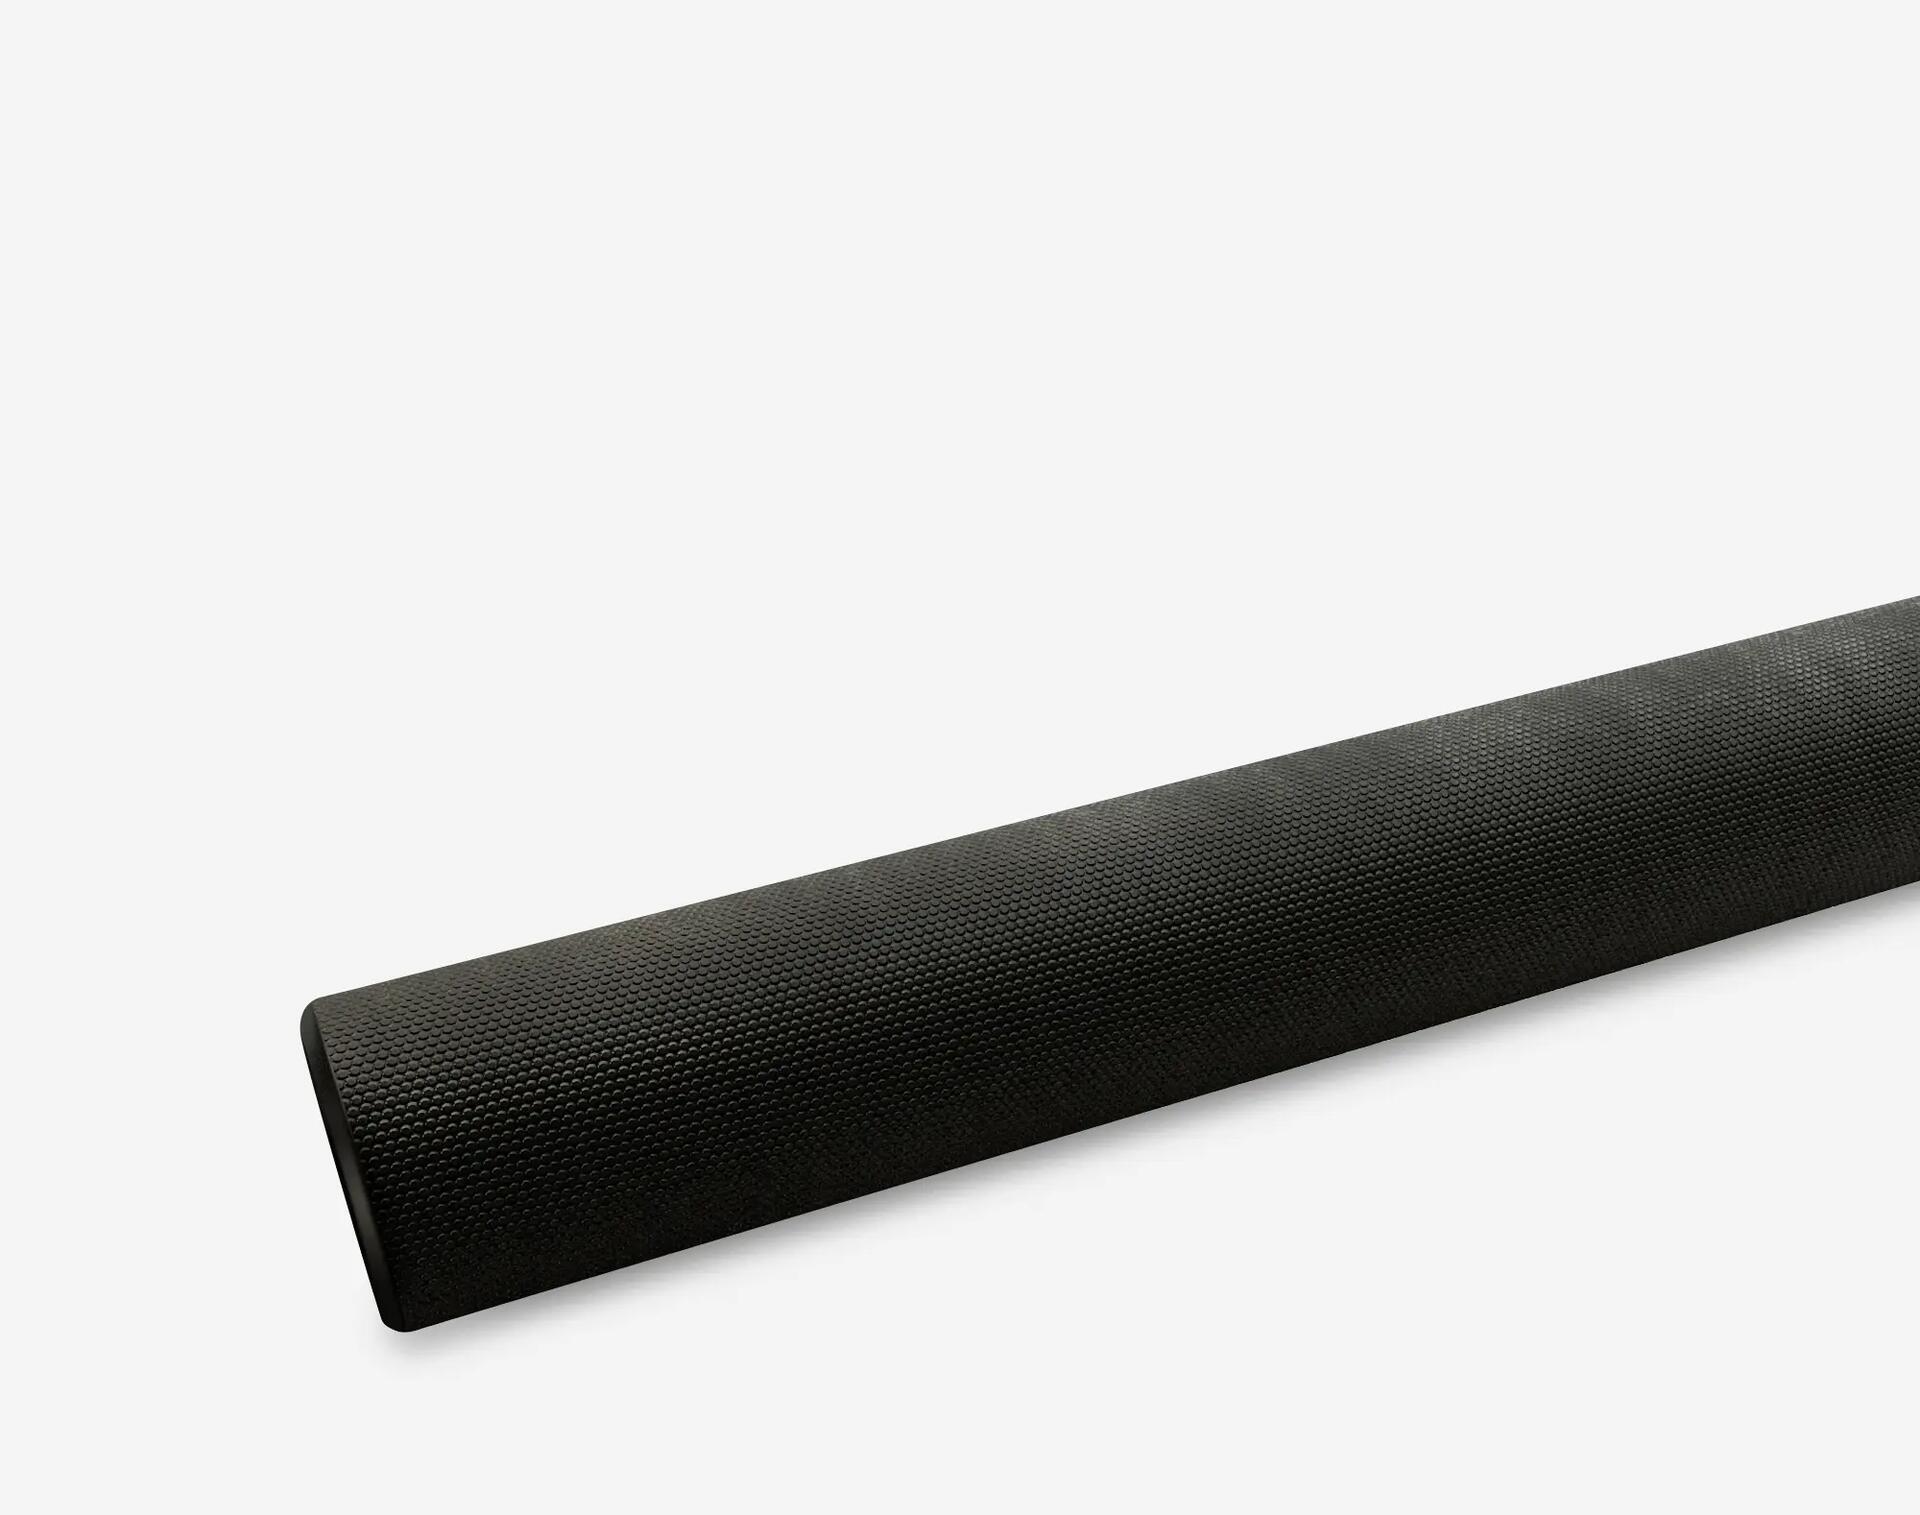 mni foam roller that is portable and light